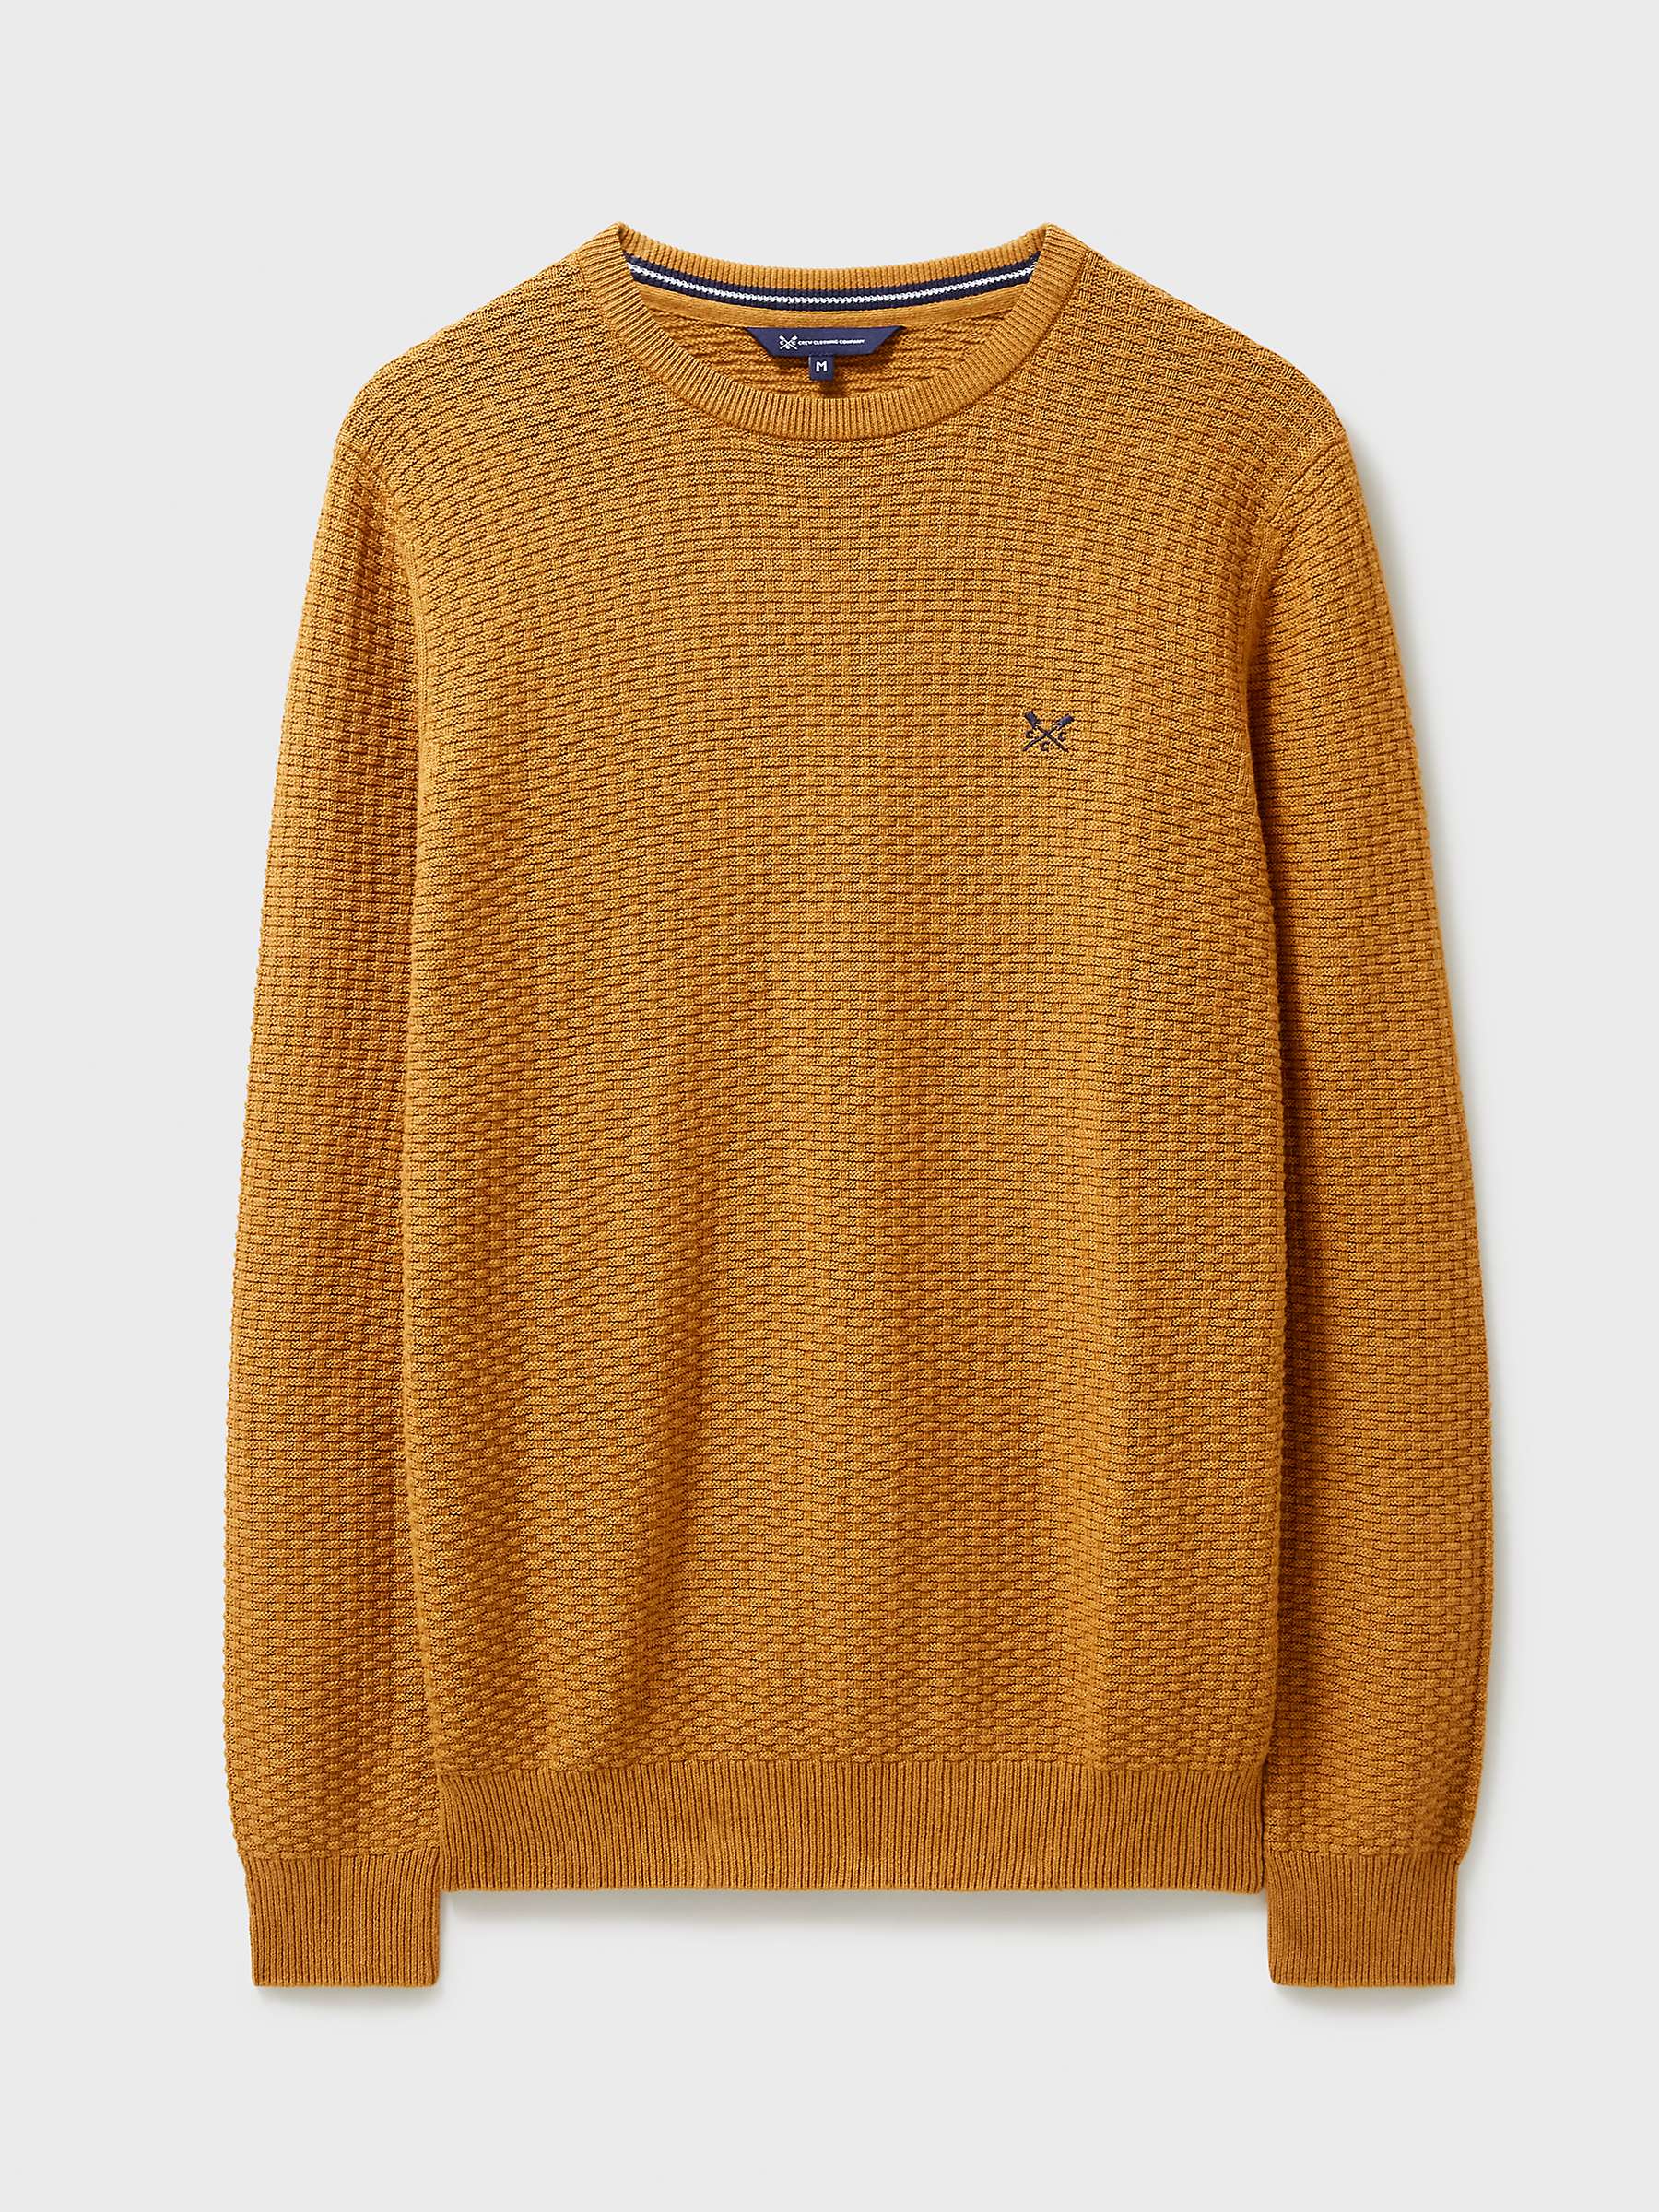 Buy Crew Clothing Breakwater Organic Cotton Knit Jumper, Yellow Online at johnlewis.com